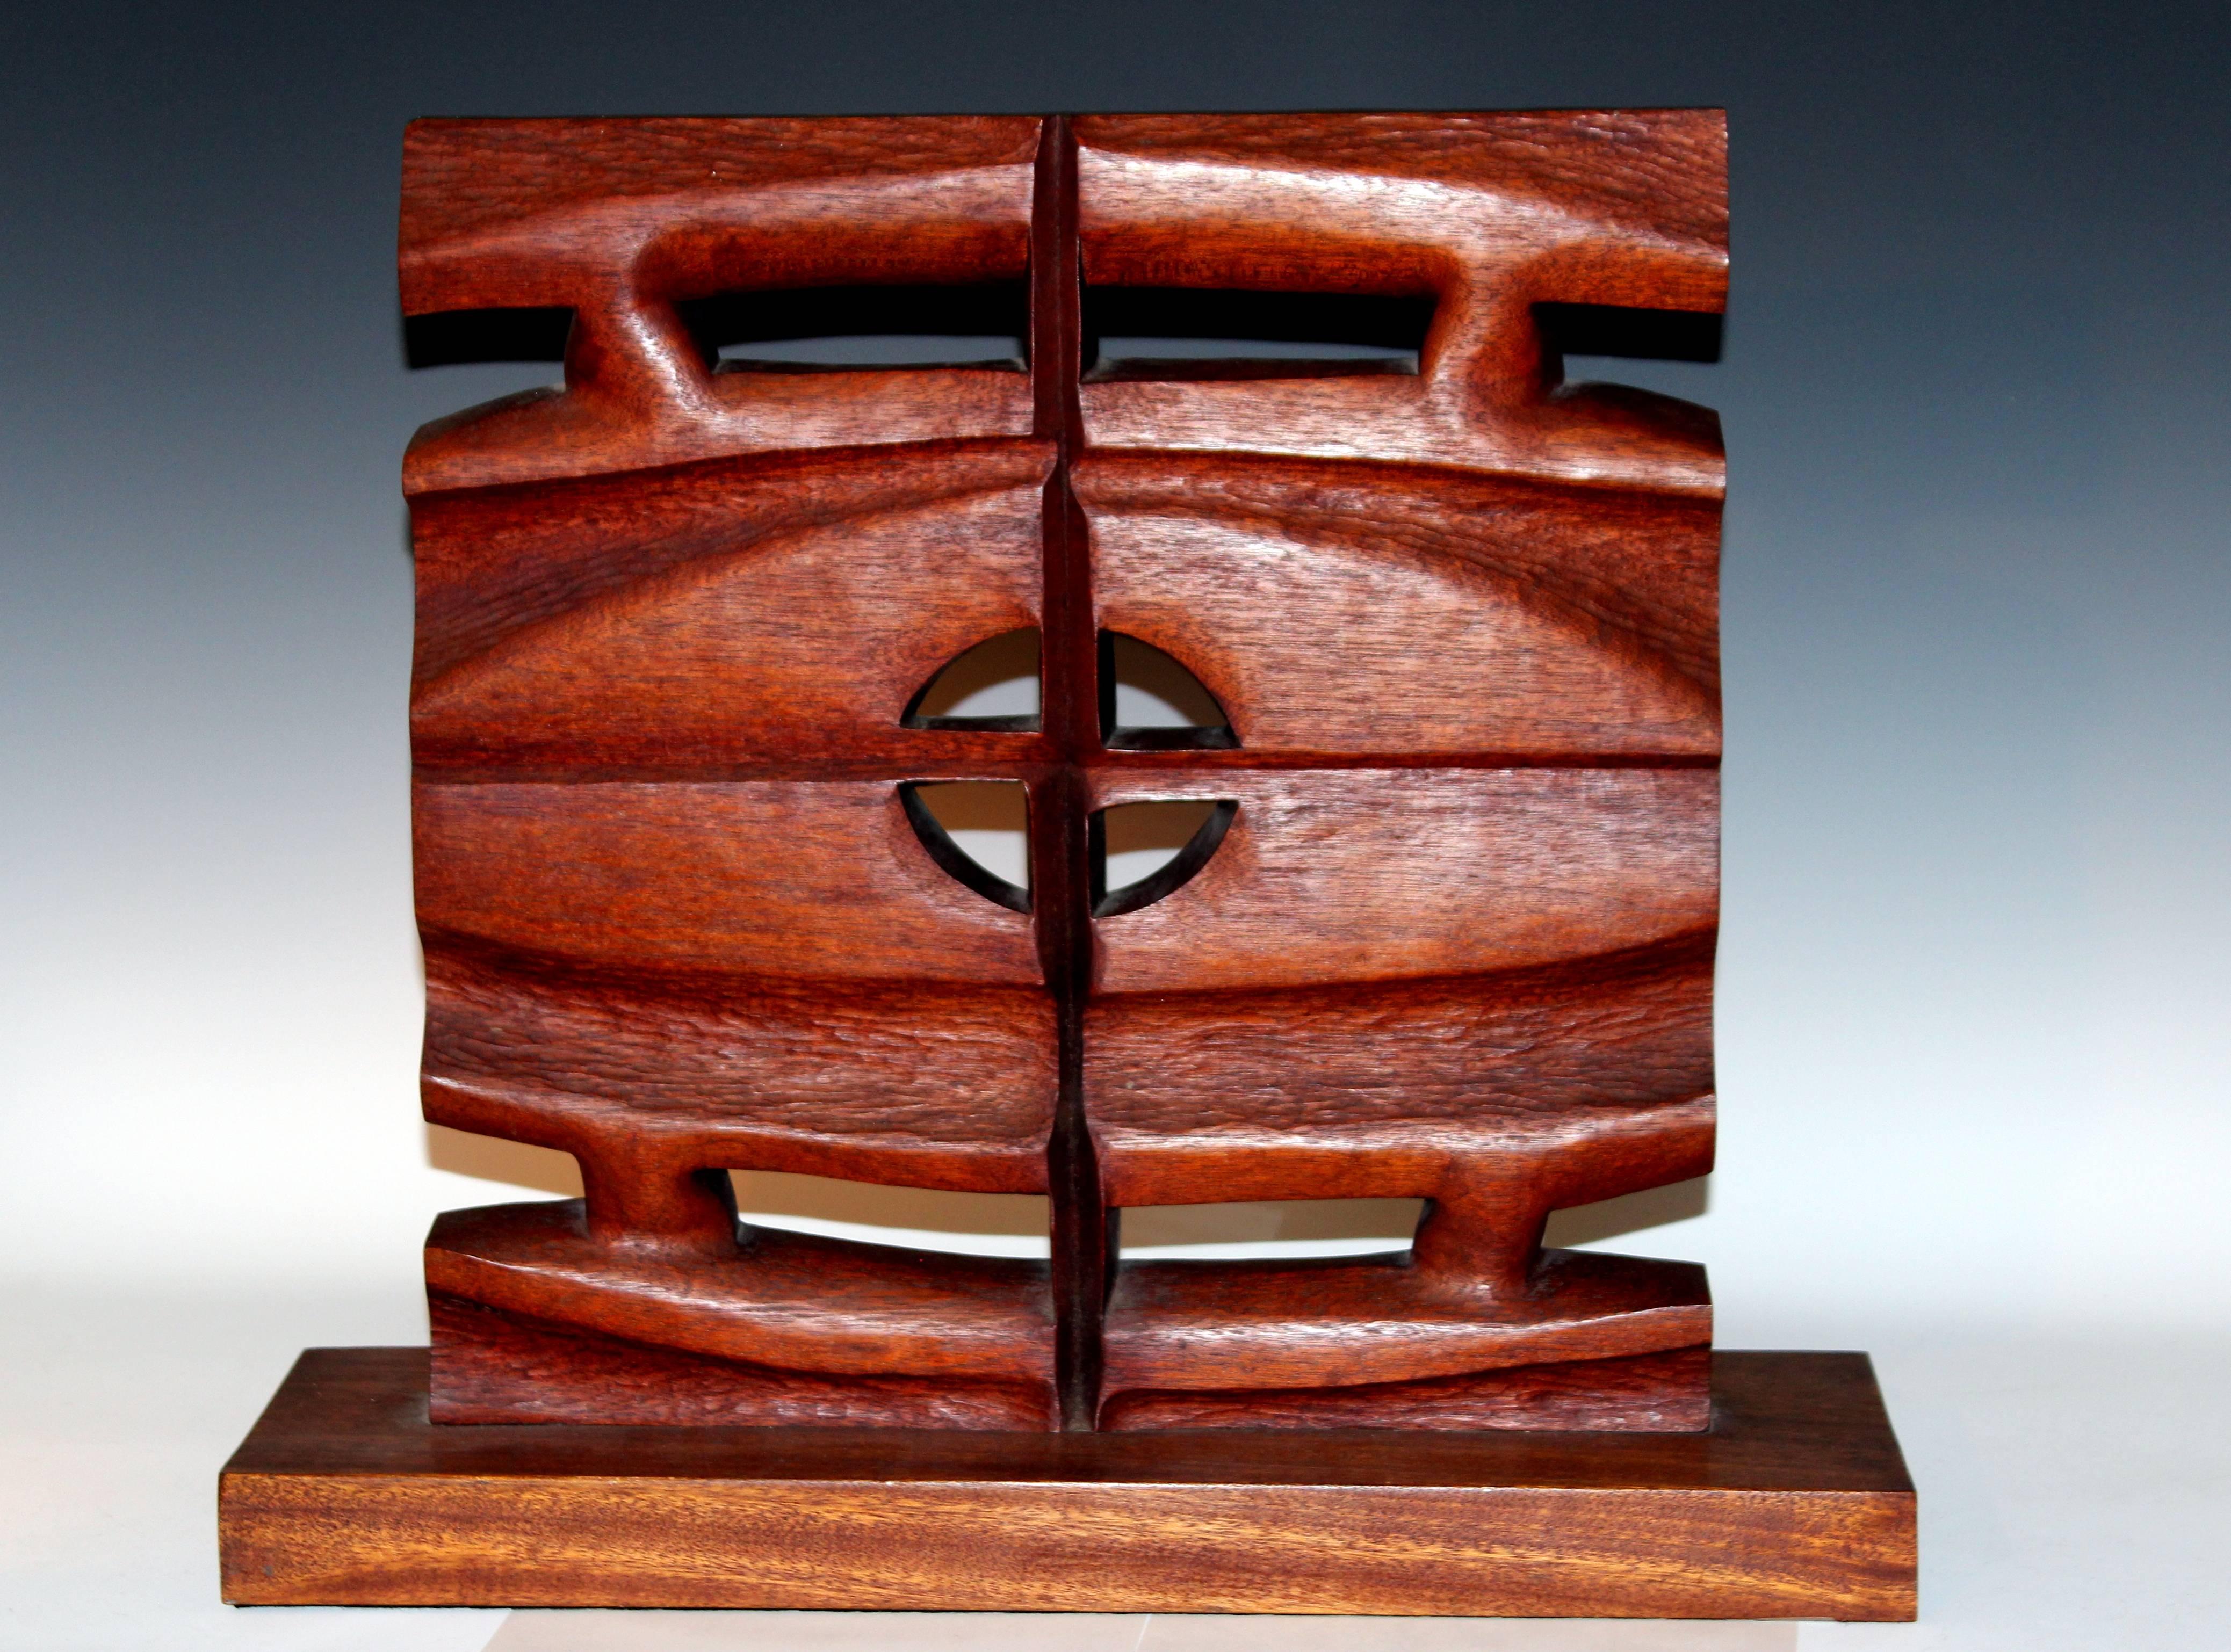 Jane McClintock totemic sculpture carved from a single large slab of mahogany and fitted with a rectangular base. Dated 1968. 20